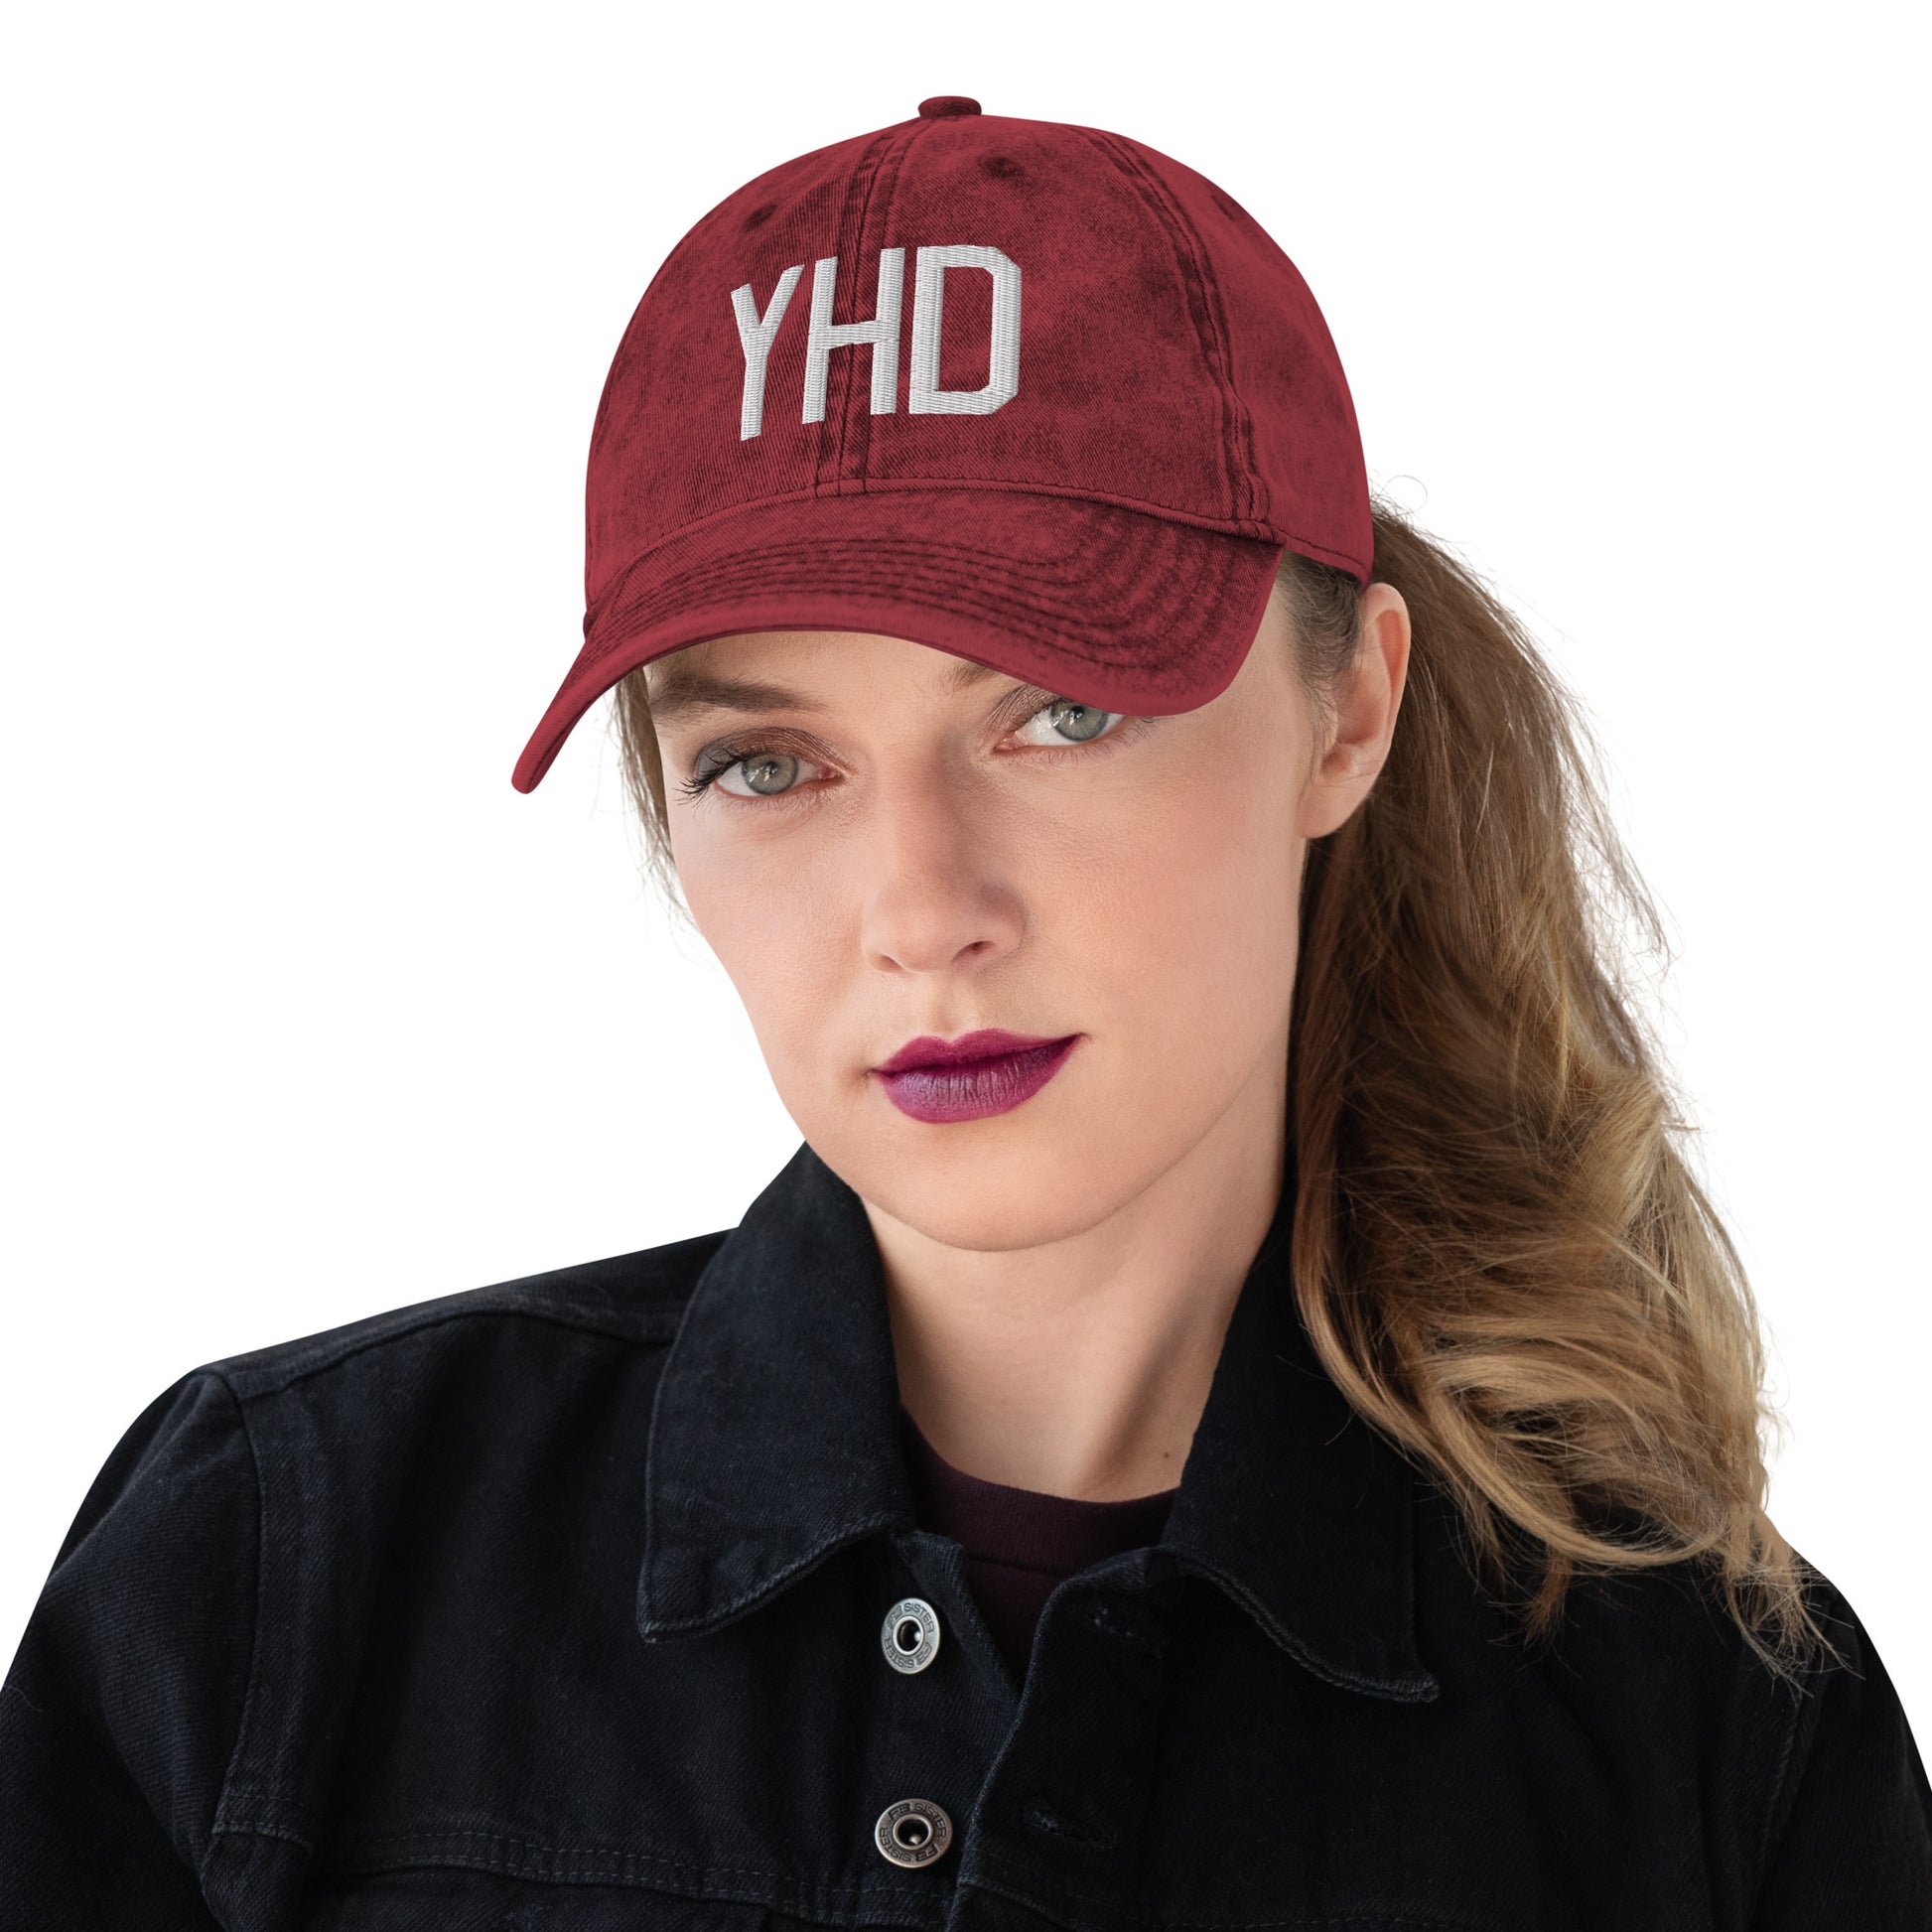 Airport Code Twill Cap - White • YHD Dryden • YHM Designs - Image 05